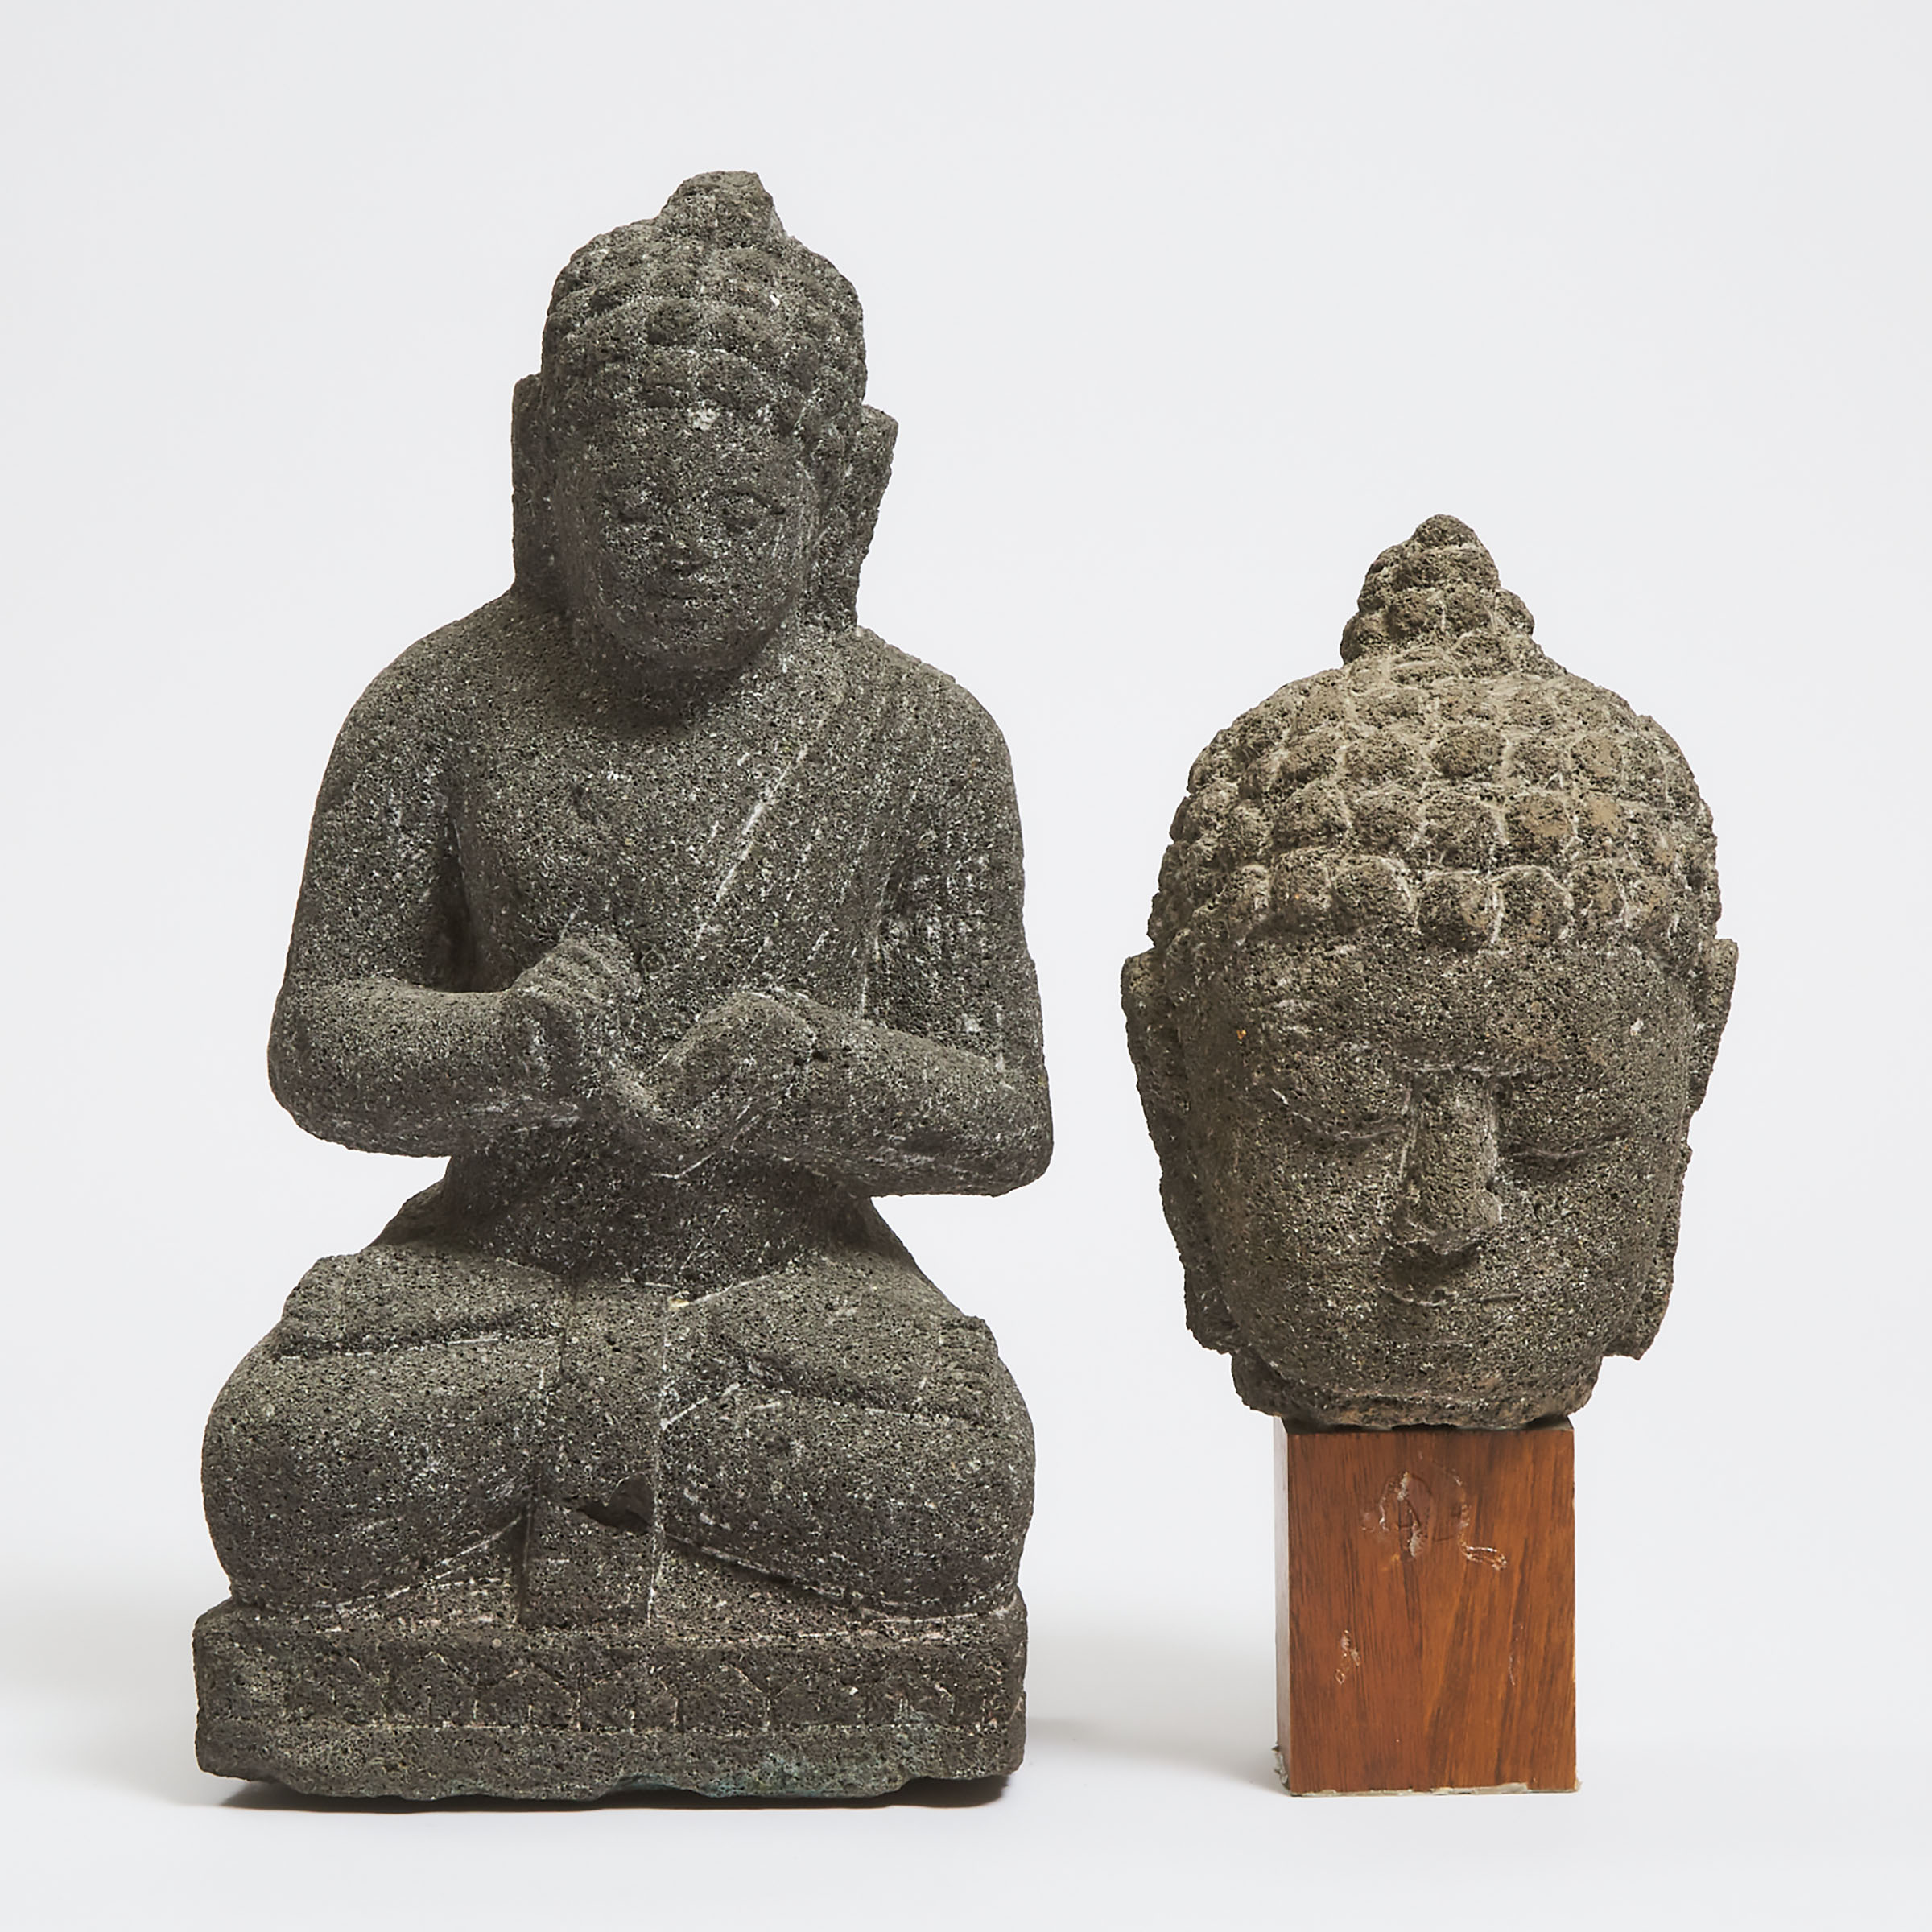 Two Javanese Volcanic Stone Carvings of Buddha, 14th Century